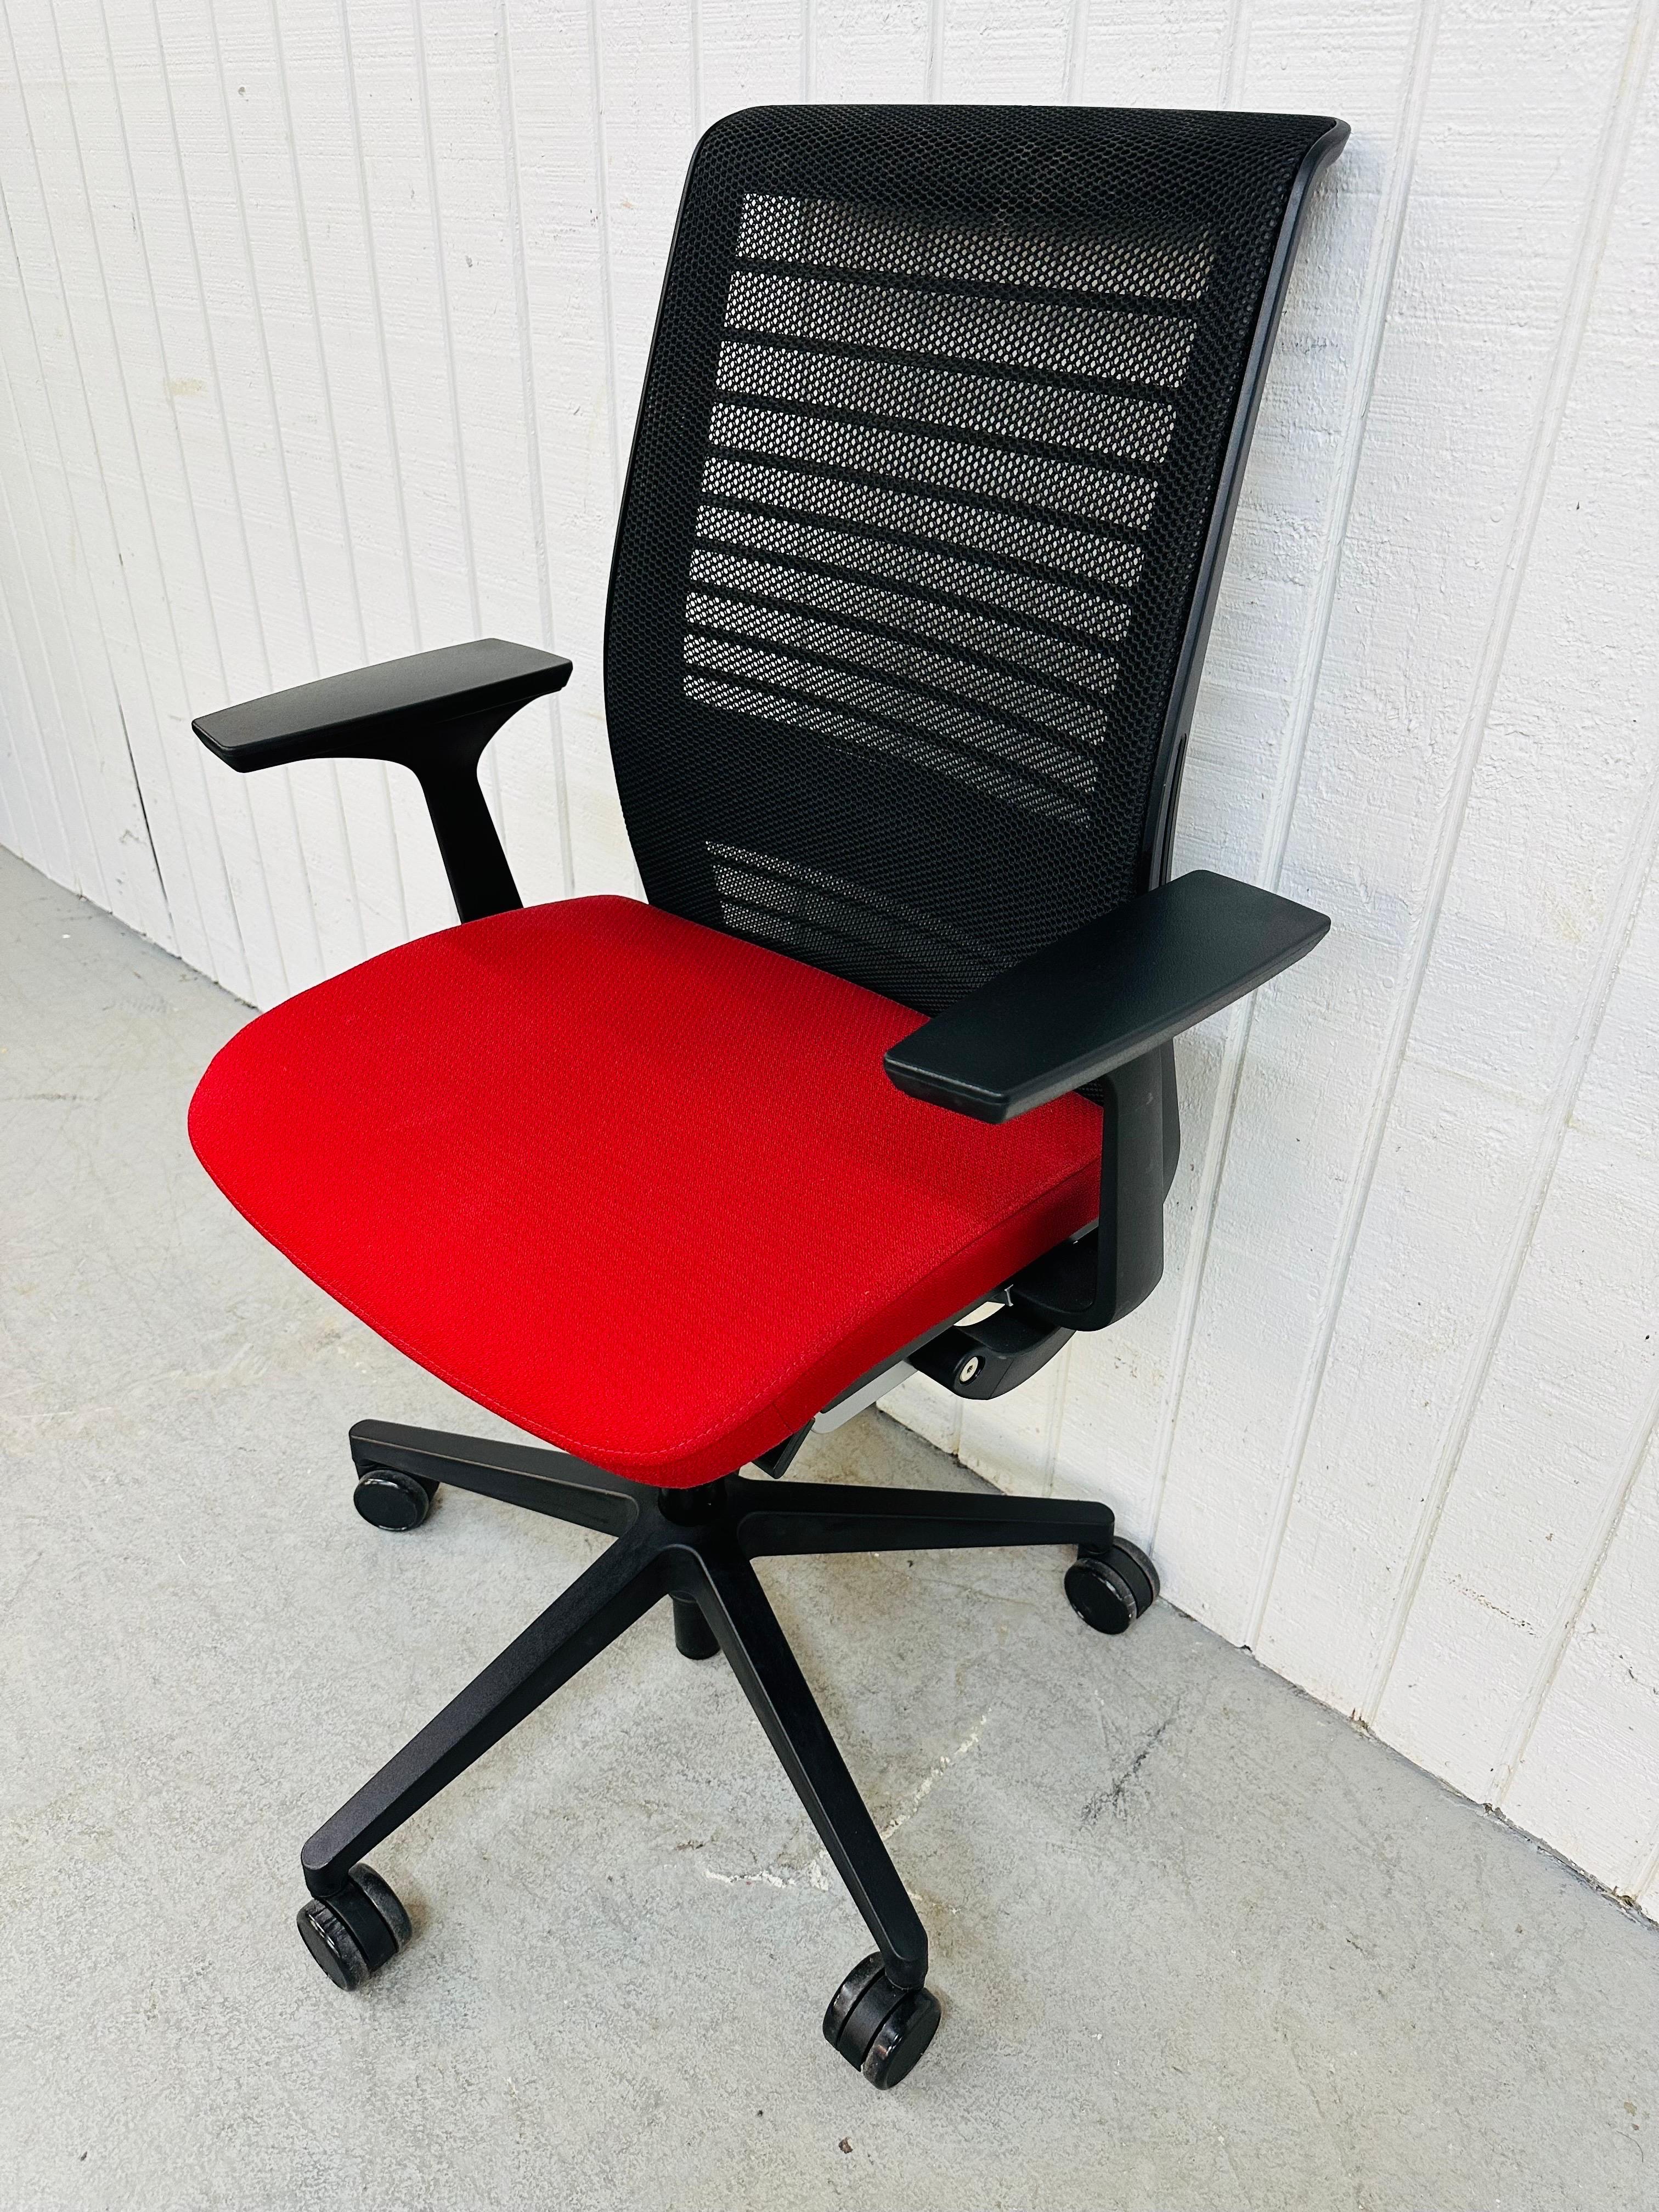 This listing is for a Modern Steelcase Office Chair. Featuring a sleek black modern designed frame, red upholstered adjustable swivel seat, and wheels for easy rolling. This is an exceptional combination of quality and design by Steelcase.